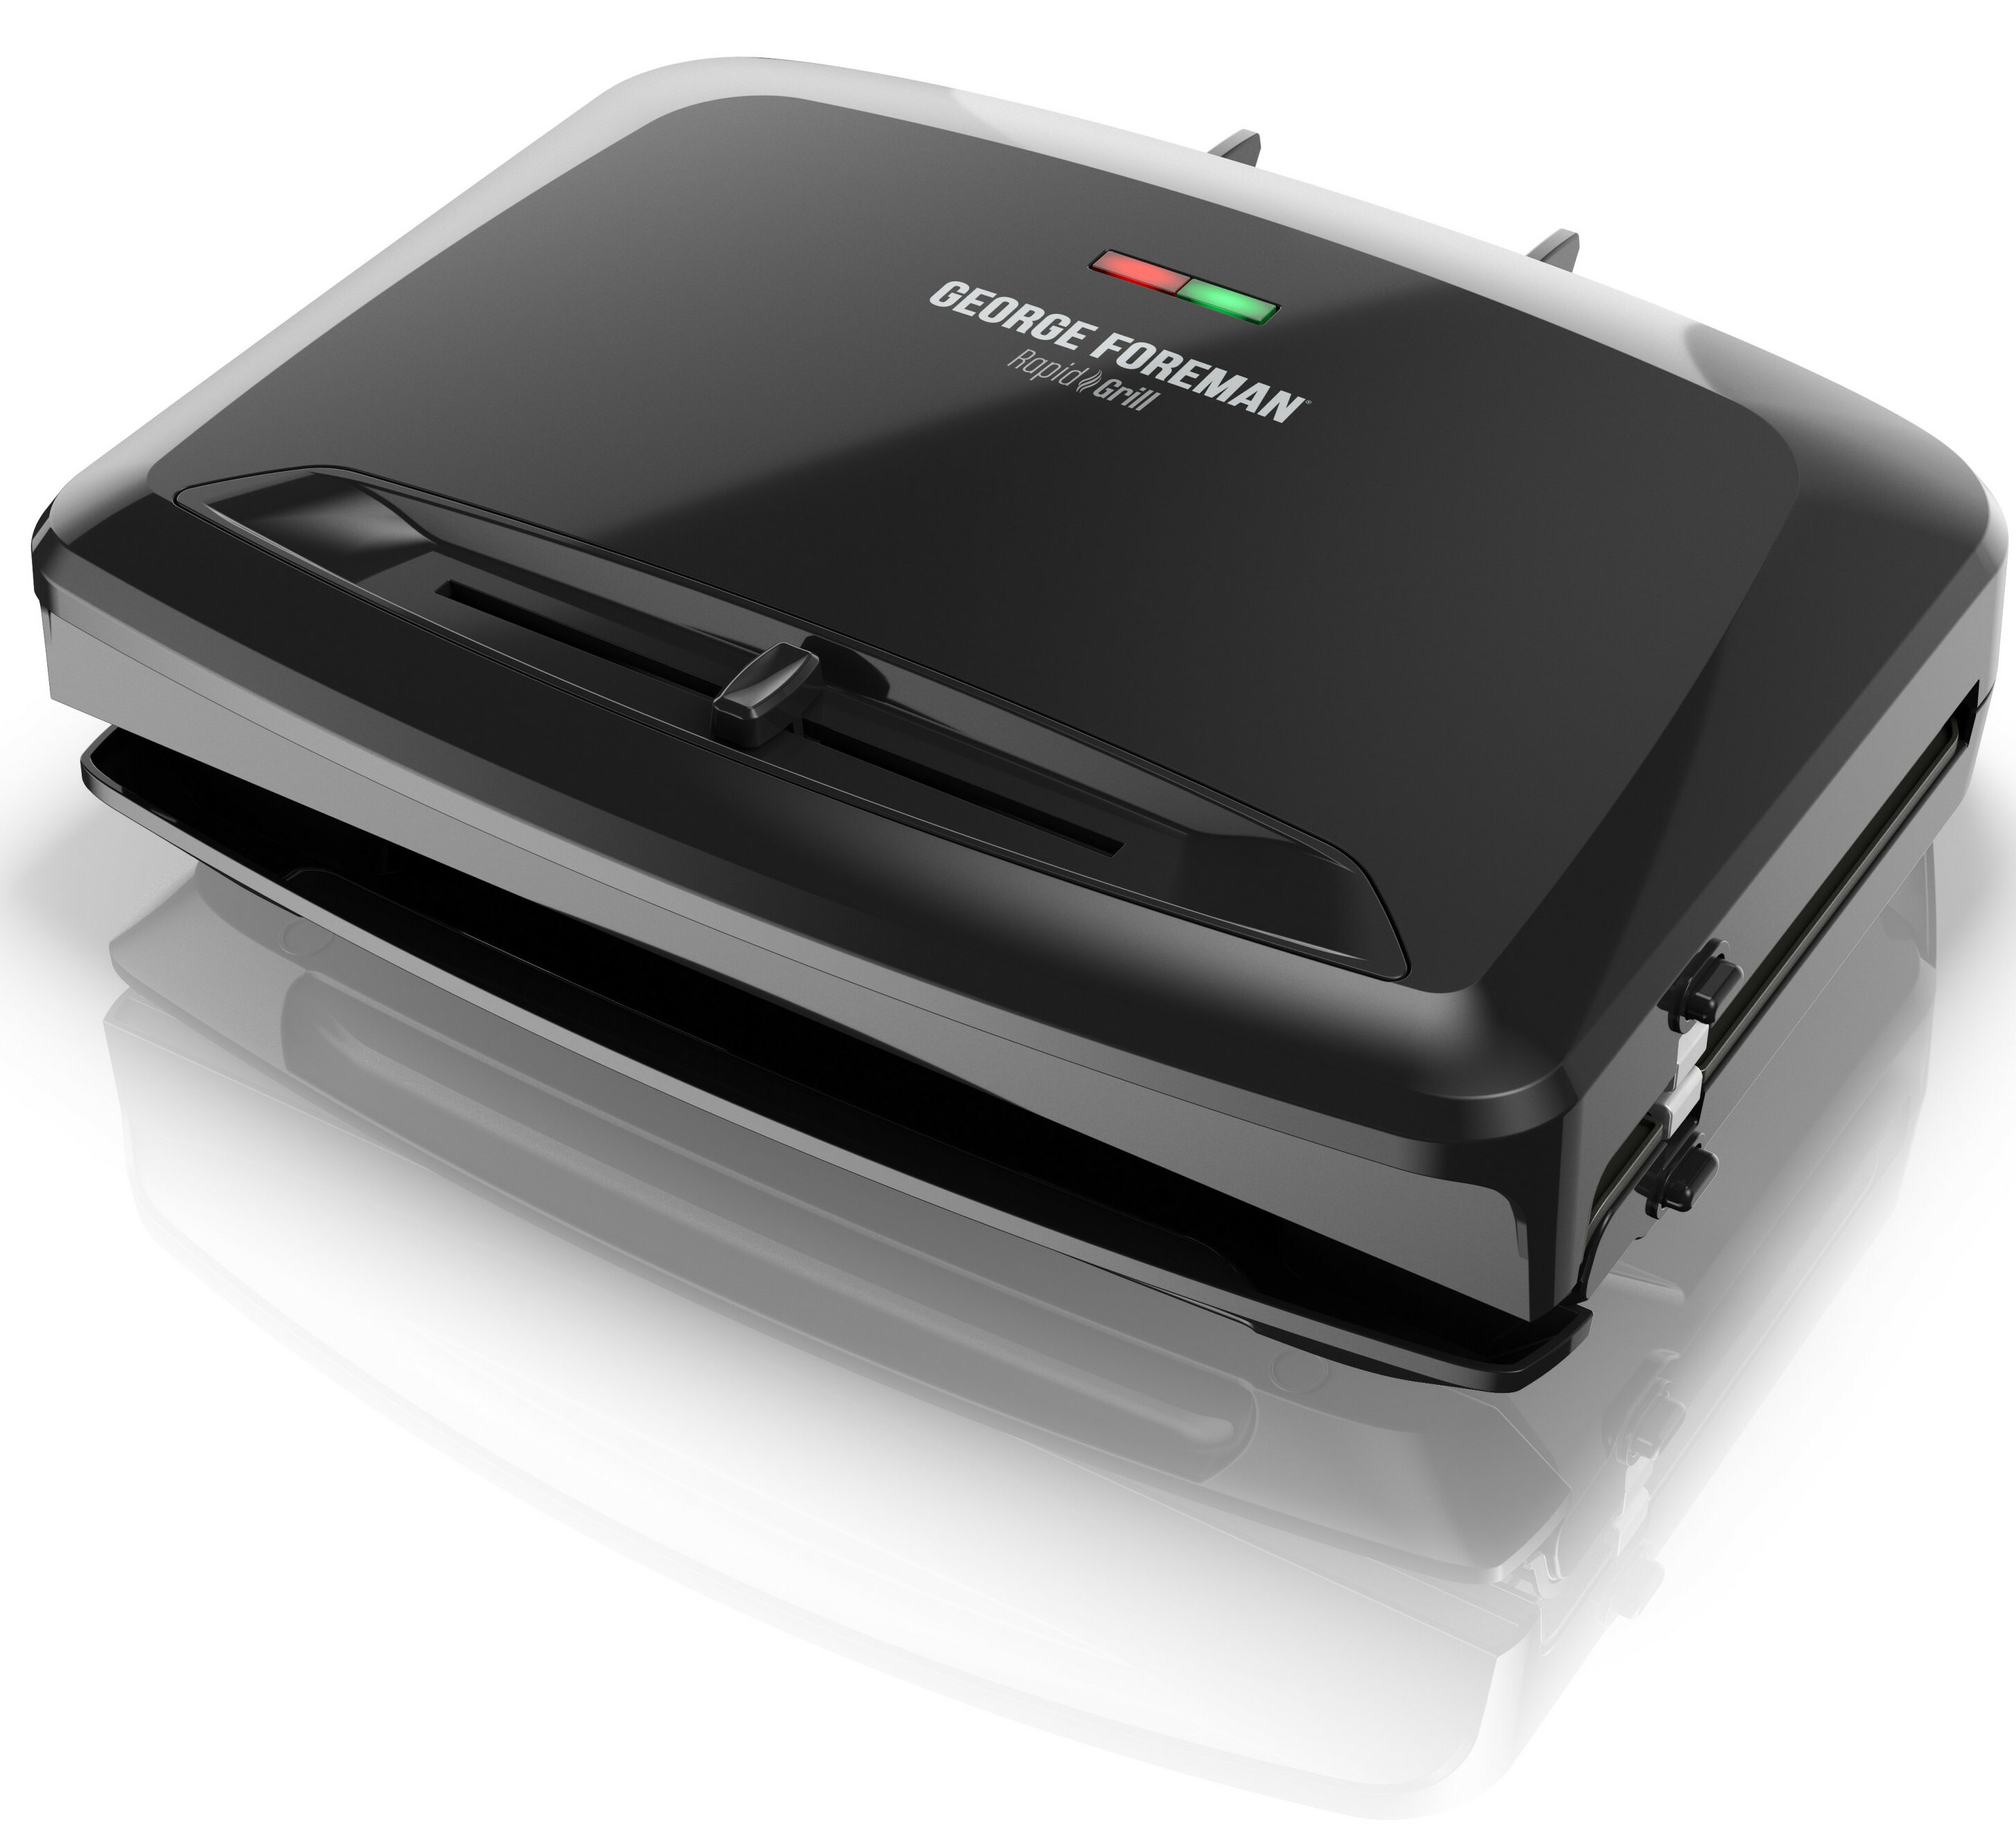 George Foreman 9-Serving Classic Plate Electric Grill and Panini Press -  household items - by owner - housewares sale